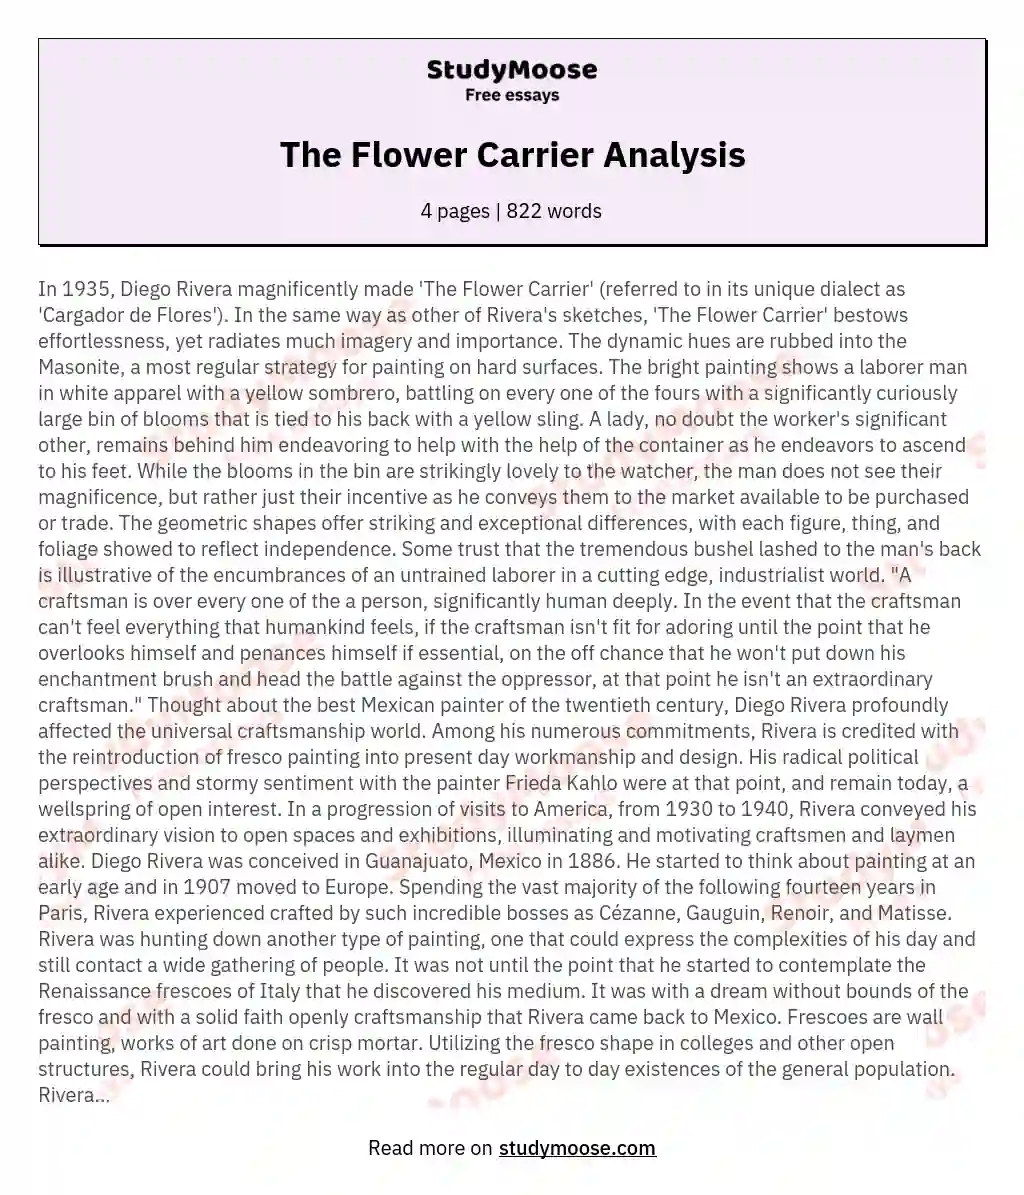 The Flower Carrier Analysis